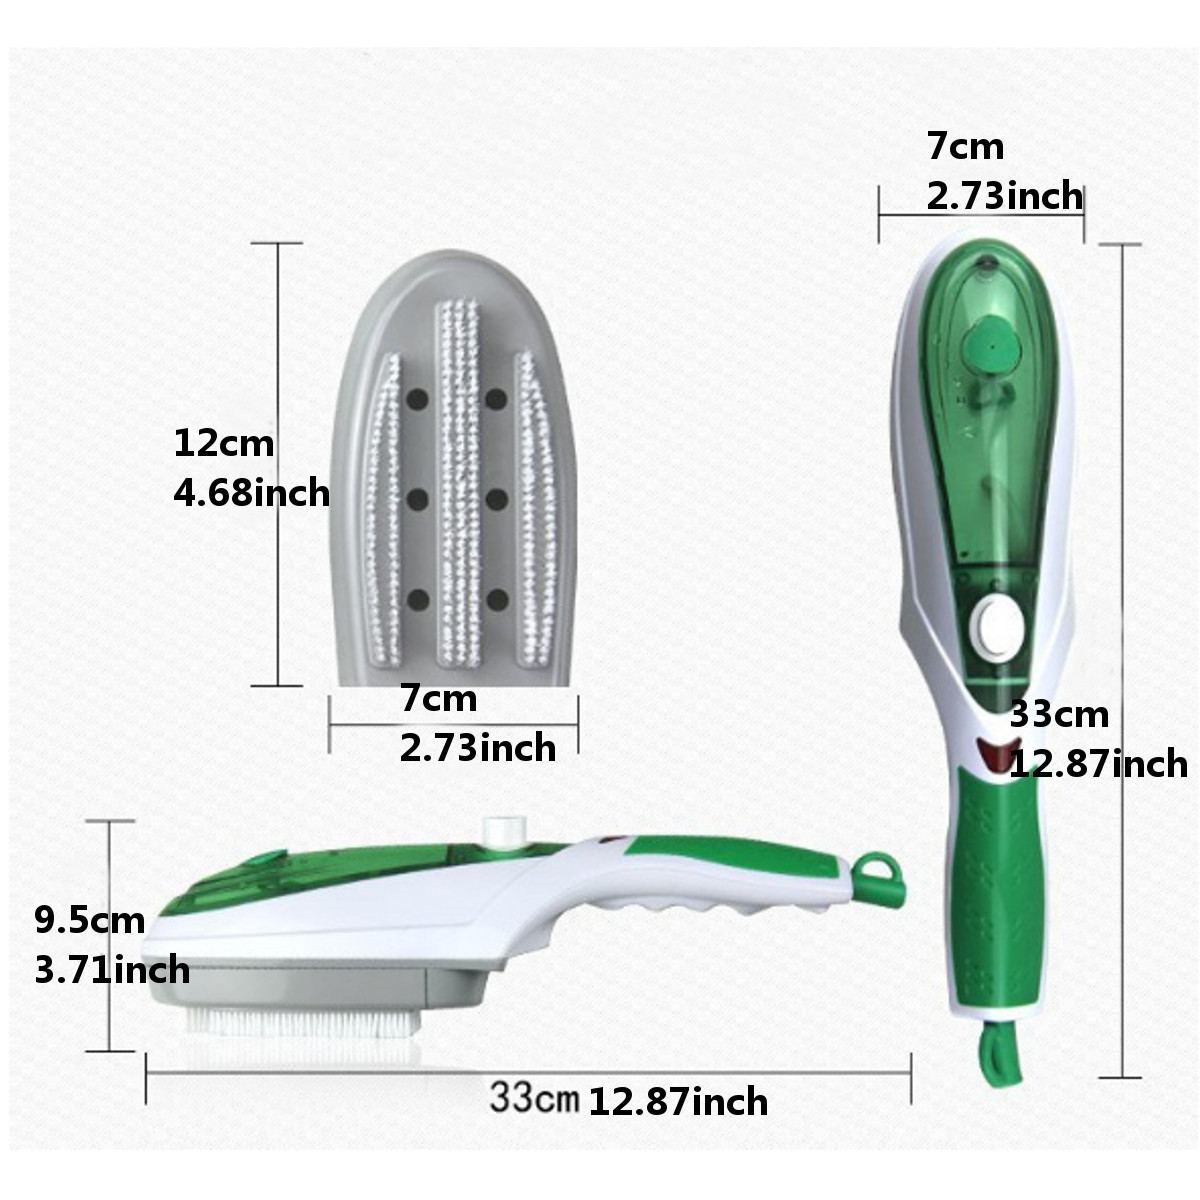 Protable-1000W-Electric-Steam-Iron-Handheld-Fabric-Laundry-Steamer-Brush-Travel-Soldering-Iron-Tips-1589841-5